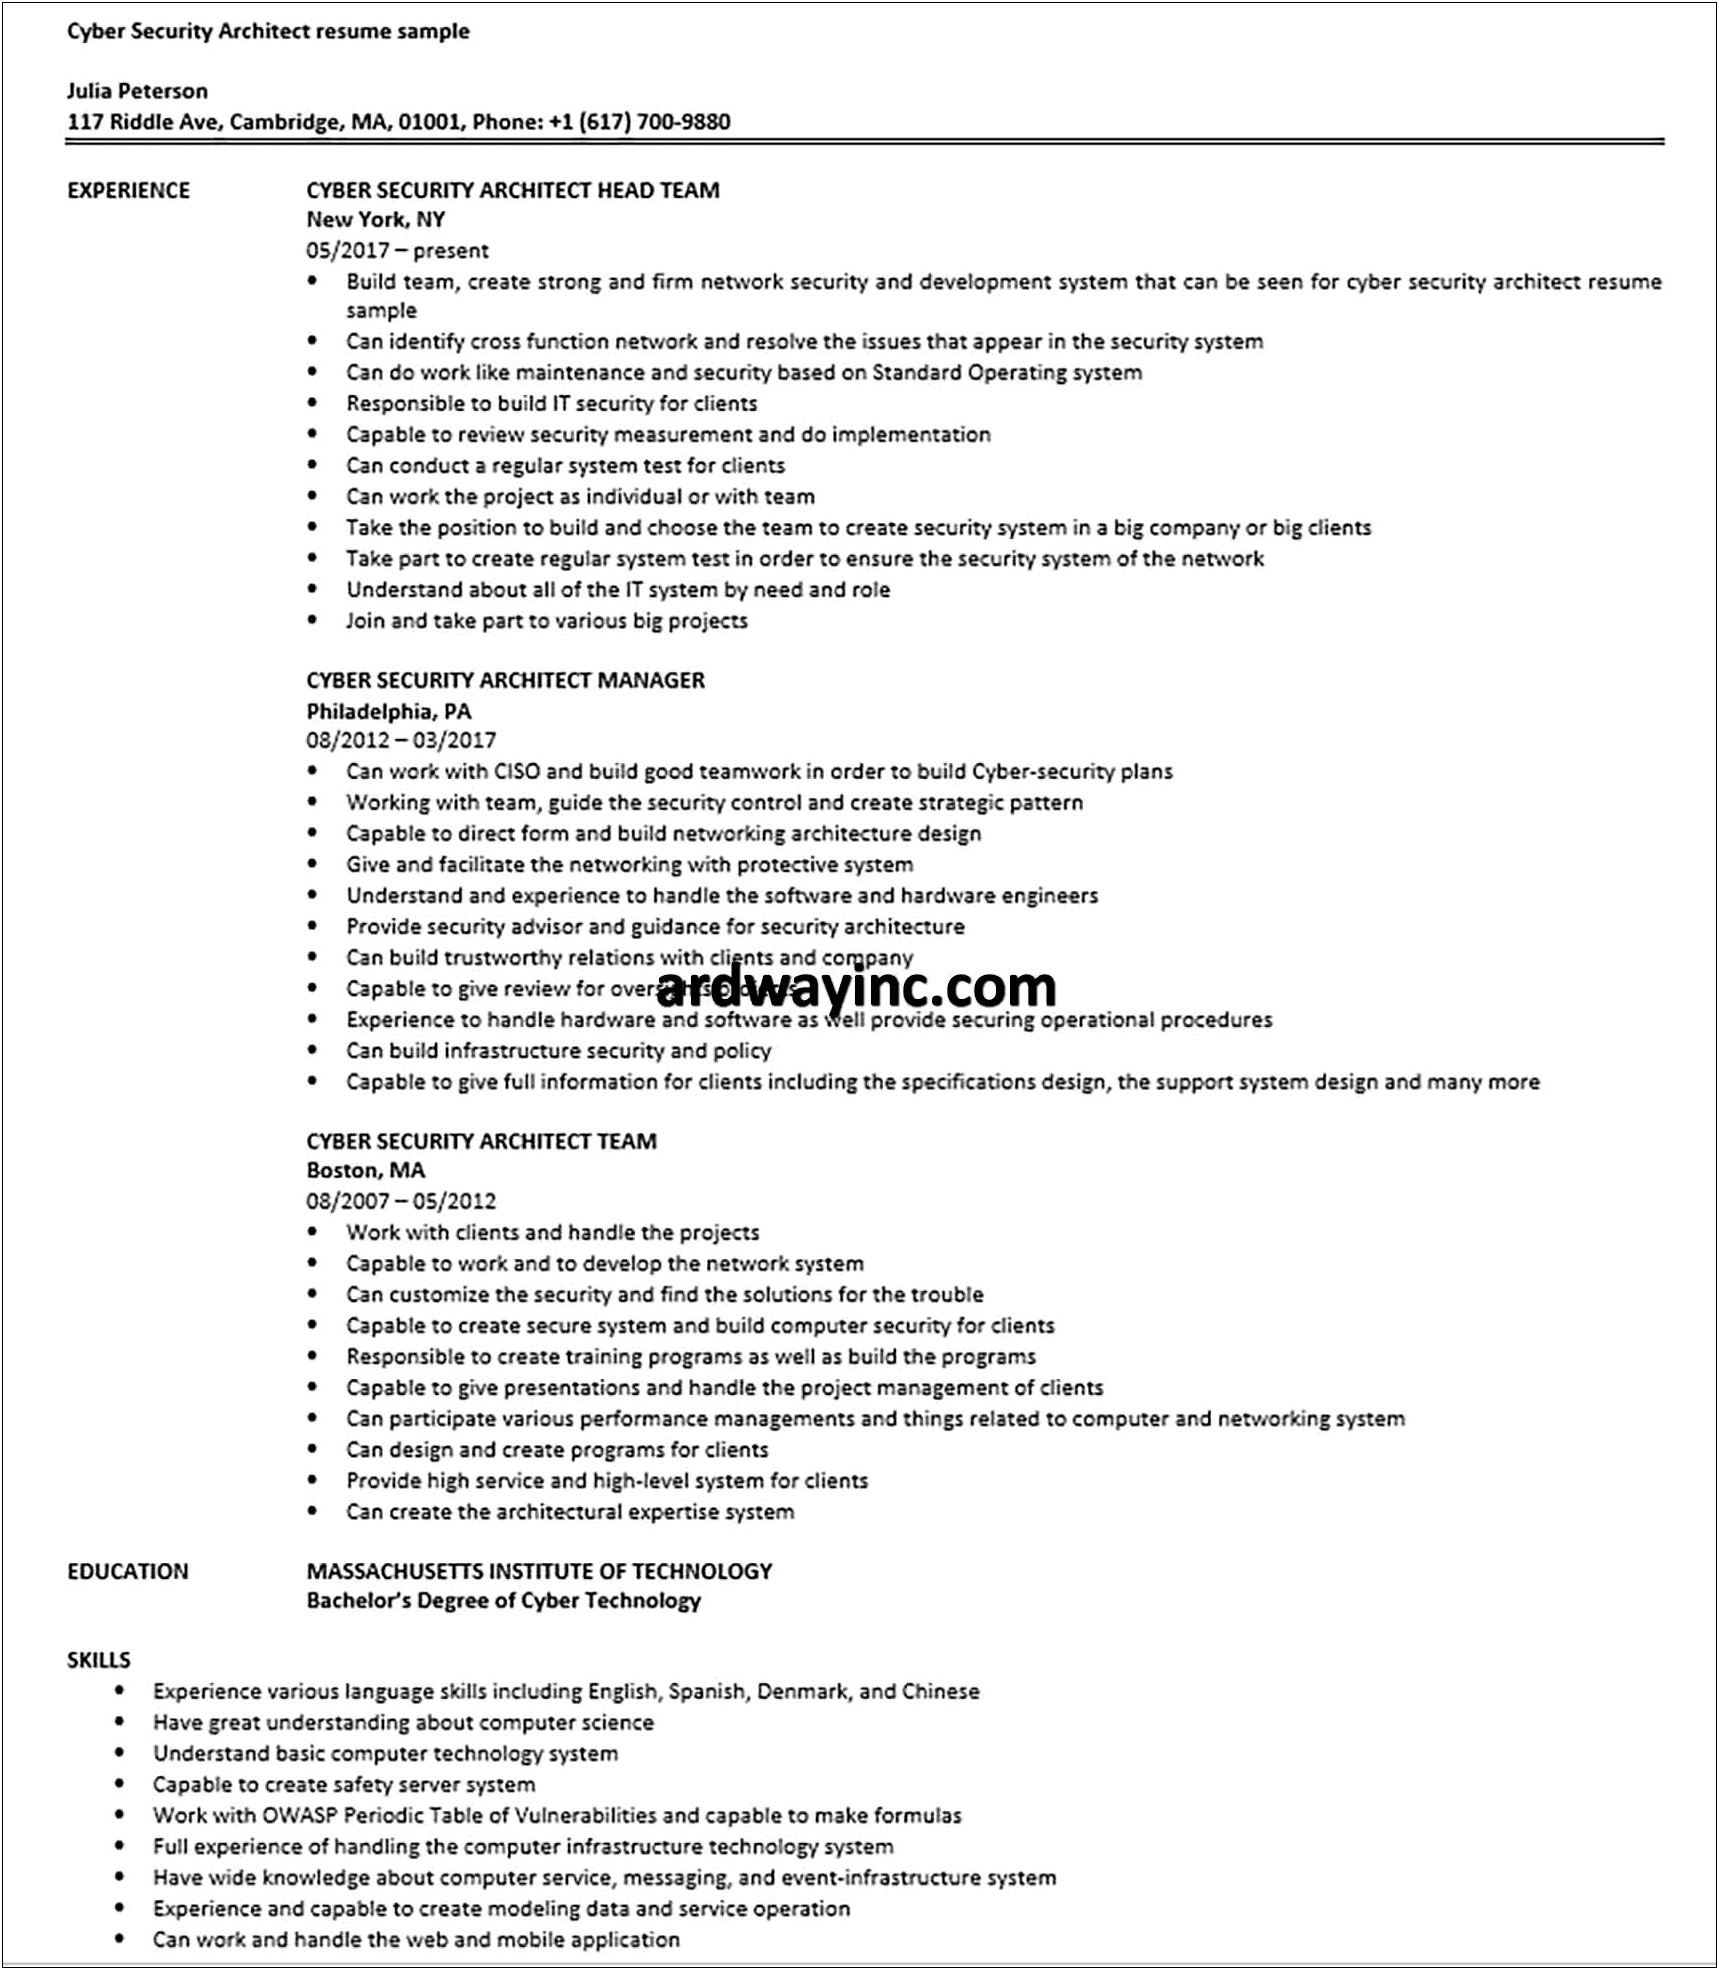 Cyber Security Analyst Resume Skills